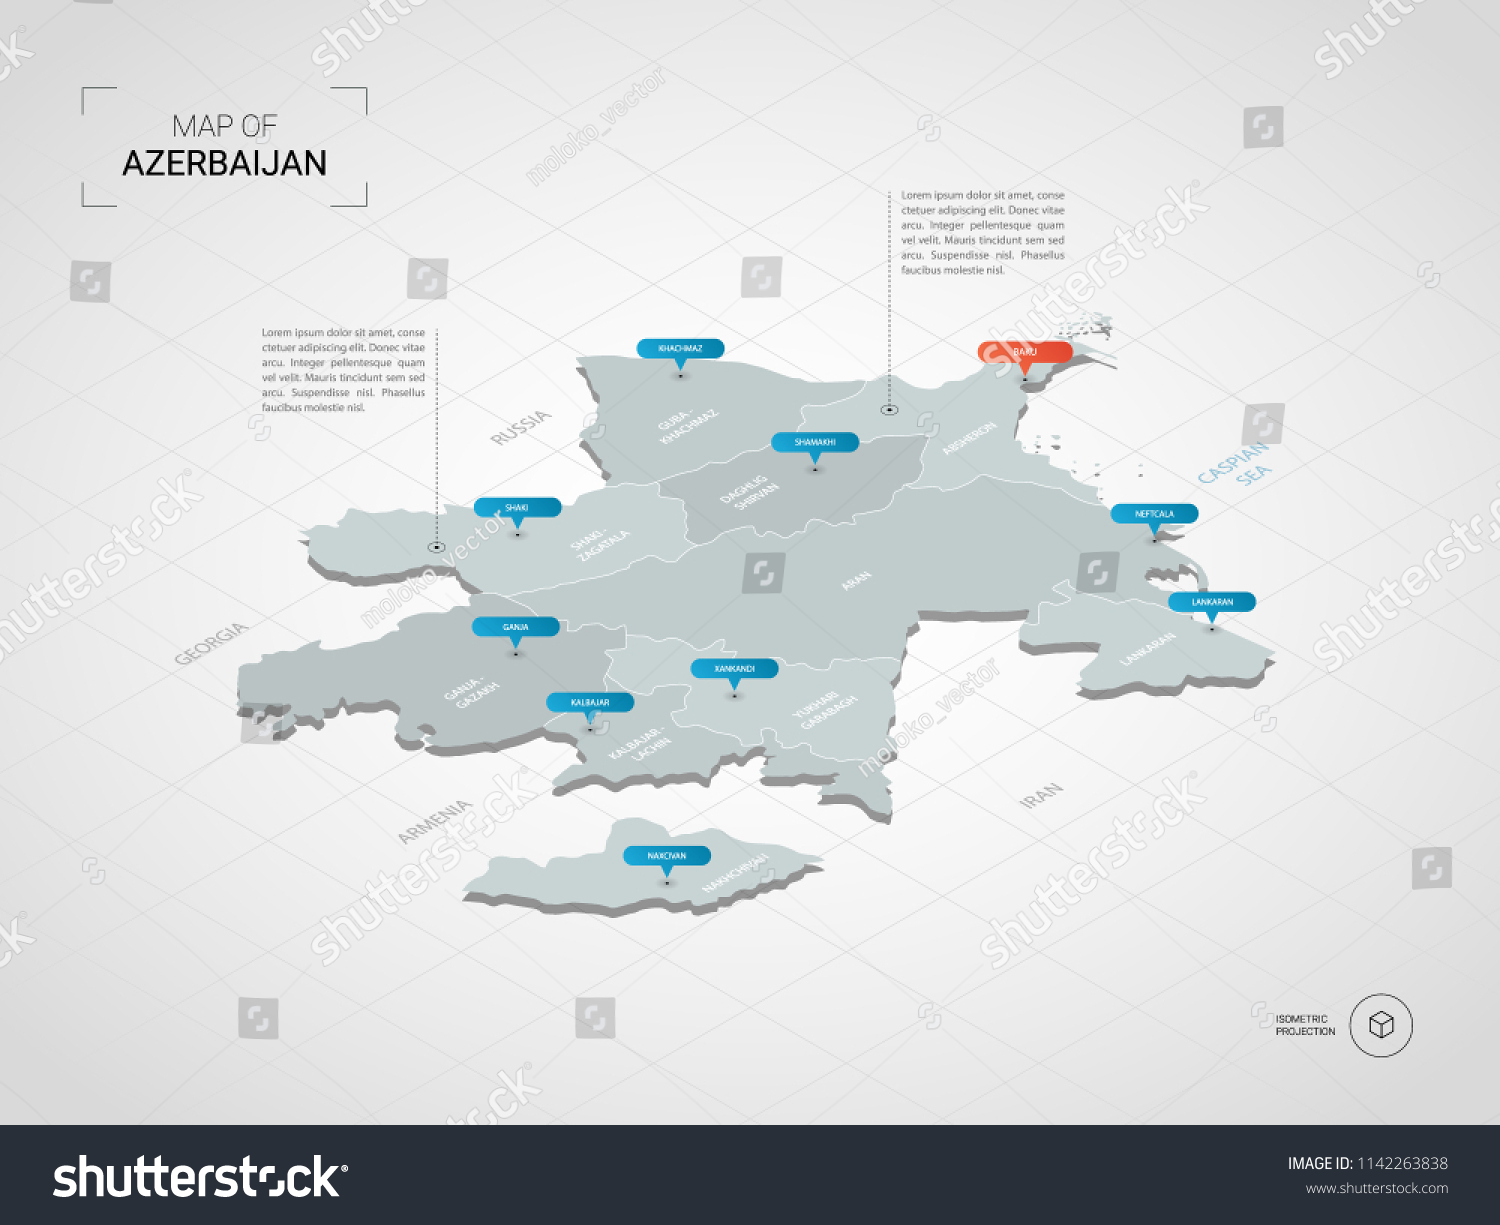 SVG of Isometric  3D Azerbaijan map. Stylized vector map illustration with cities, borders, capital Baku , administrative divisions and pointer marks; gradient background with grid. 
 svg